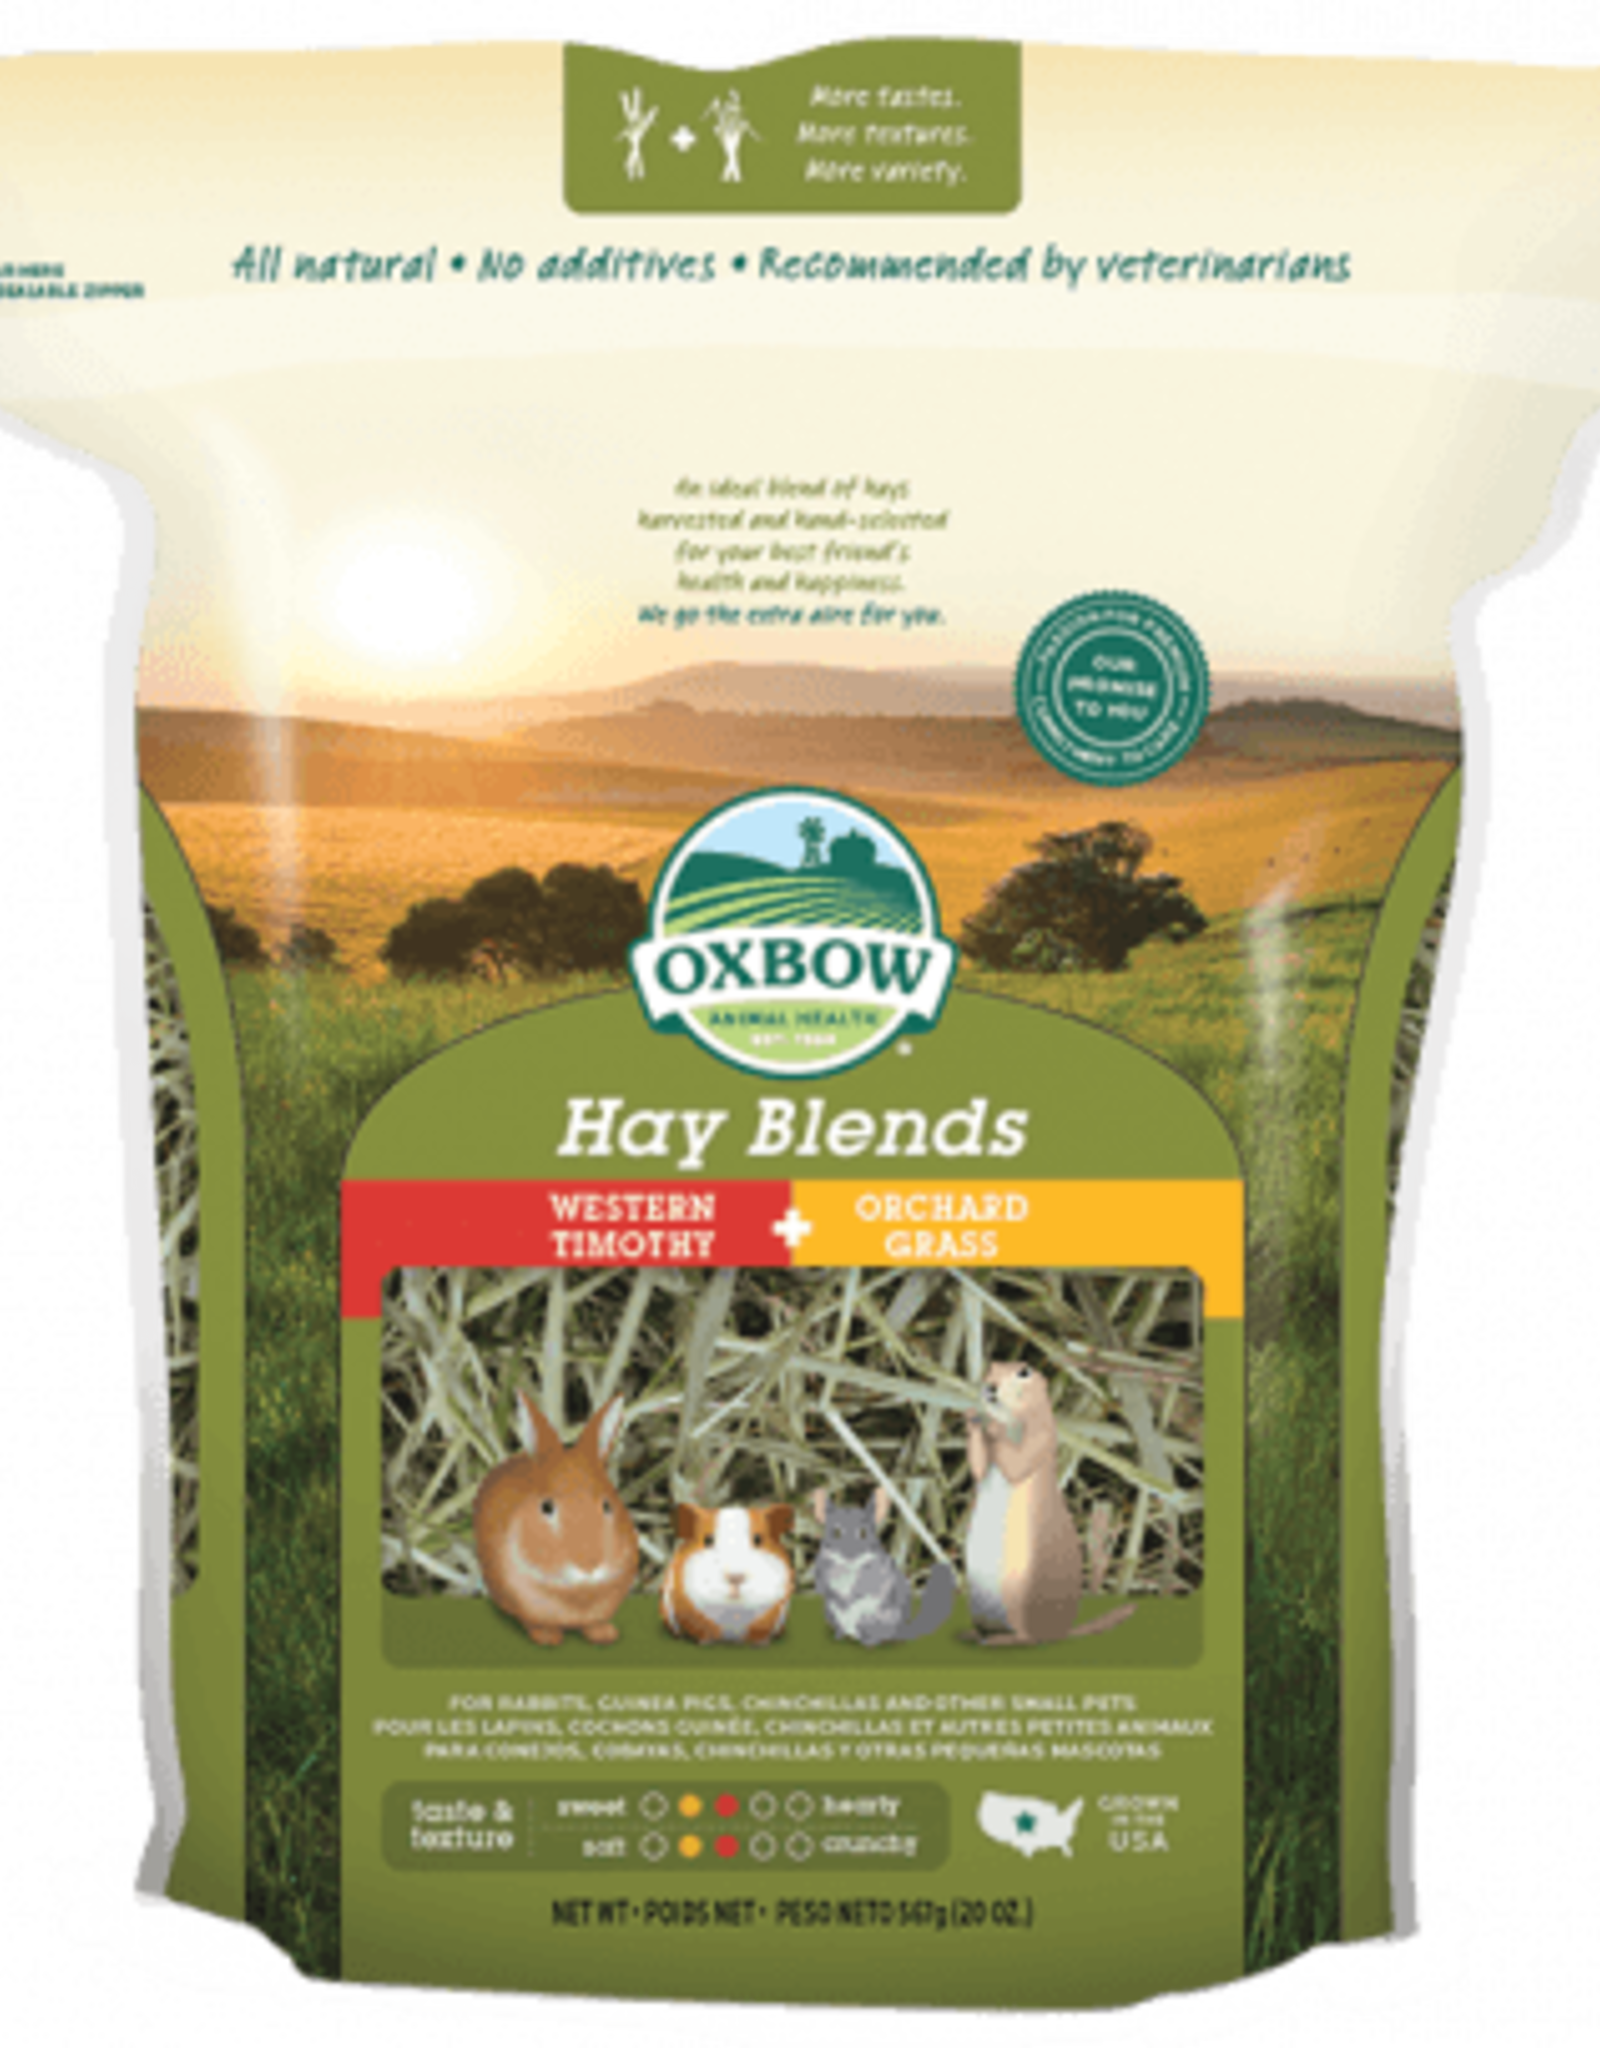 OXBOW PET PRODUCTS OXBOW HAY BLENDS TIMOTHY & ORCHARD GRASS 15OZ